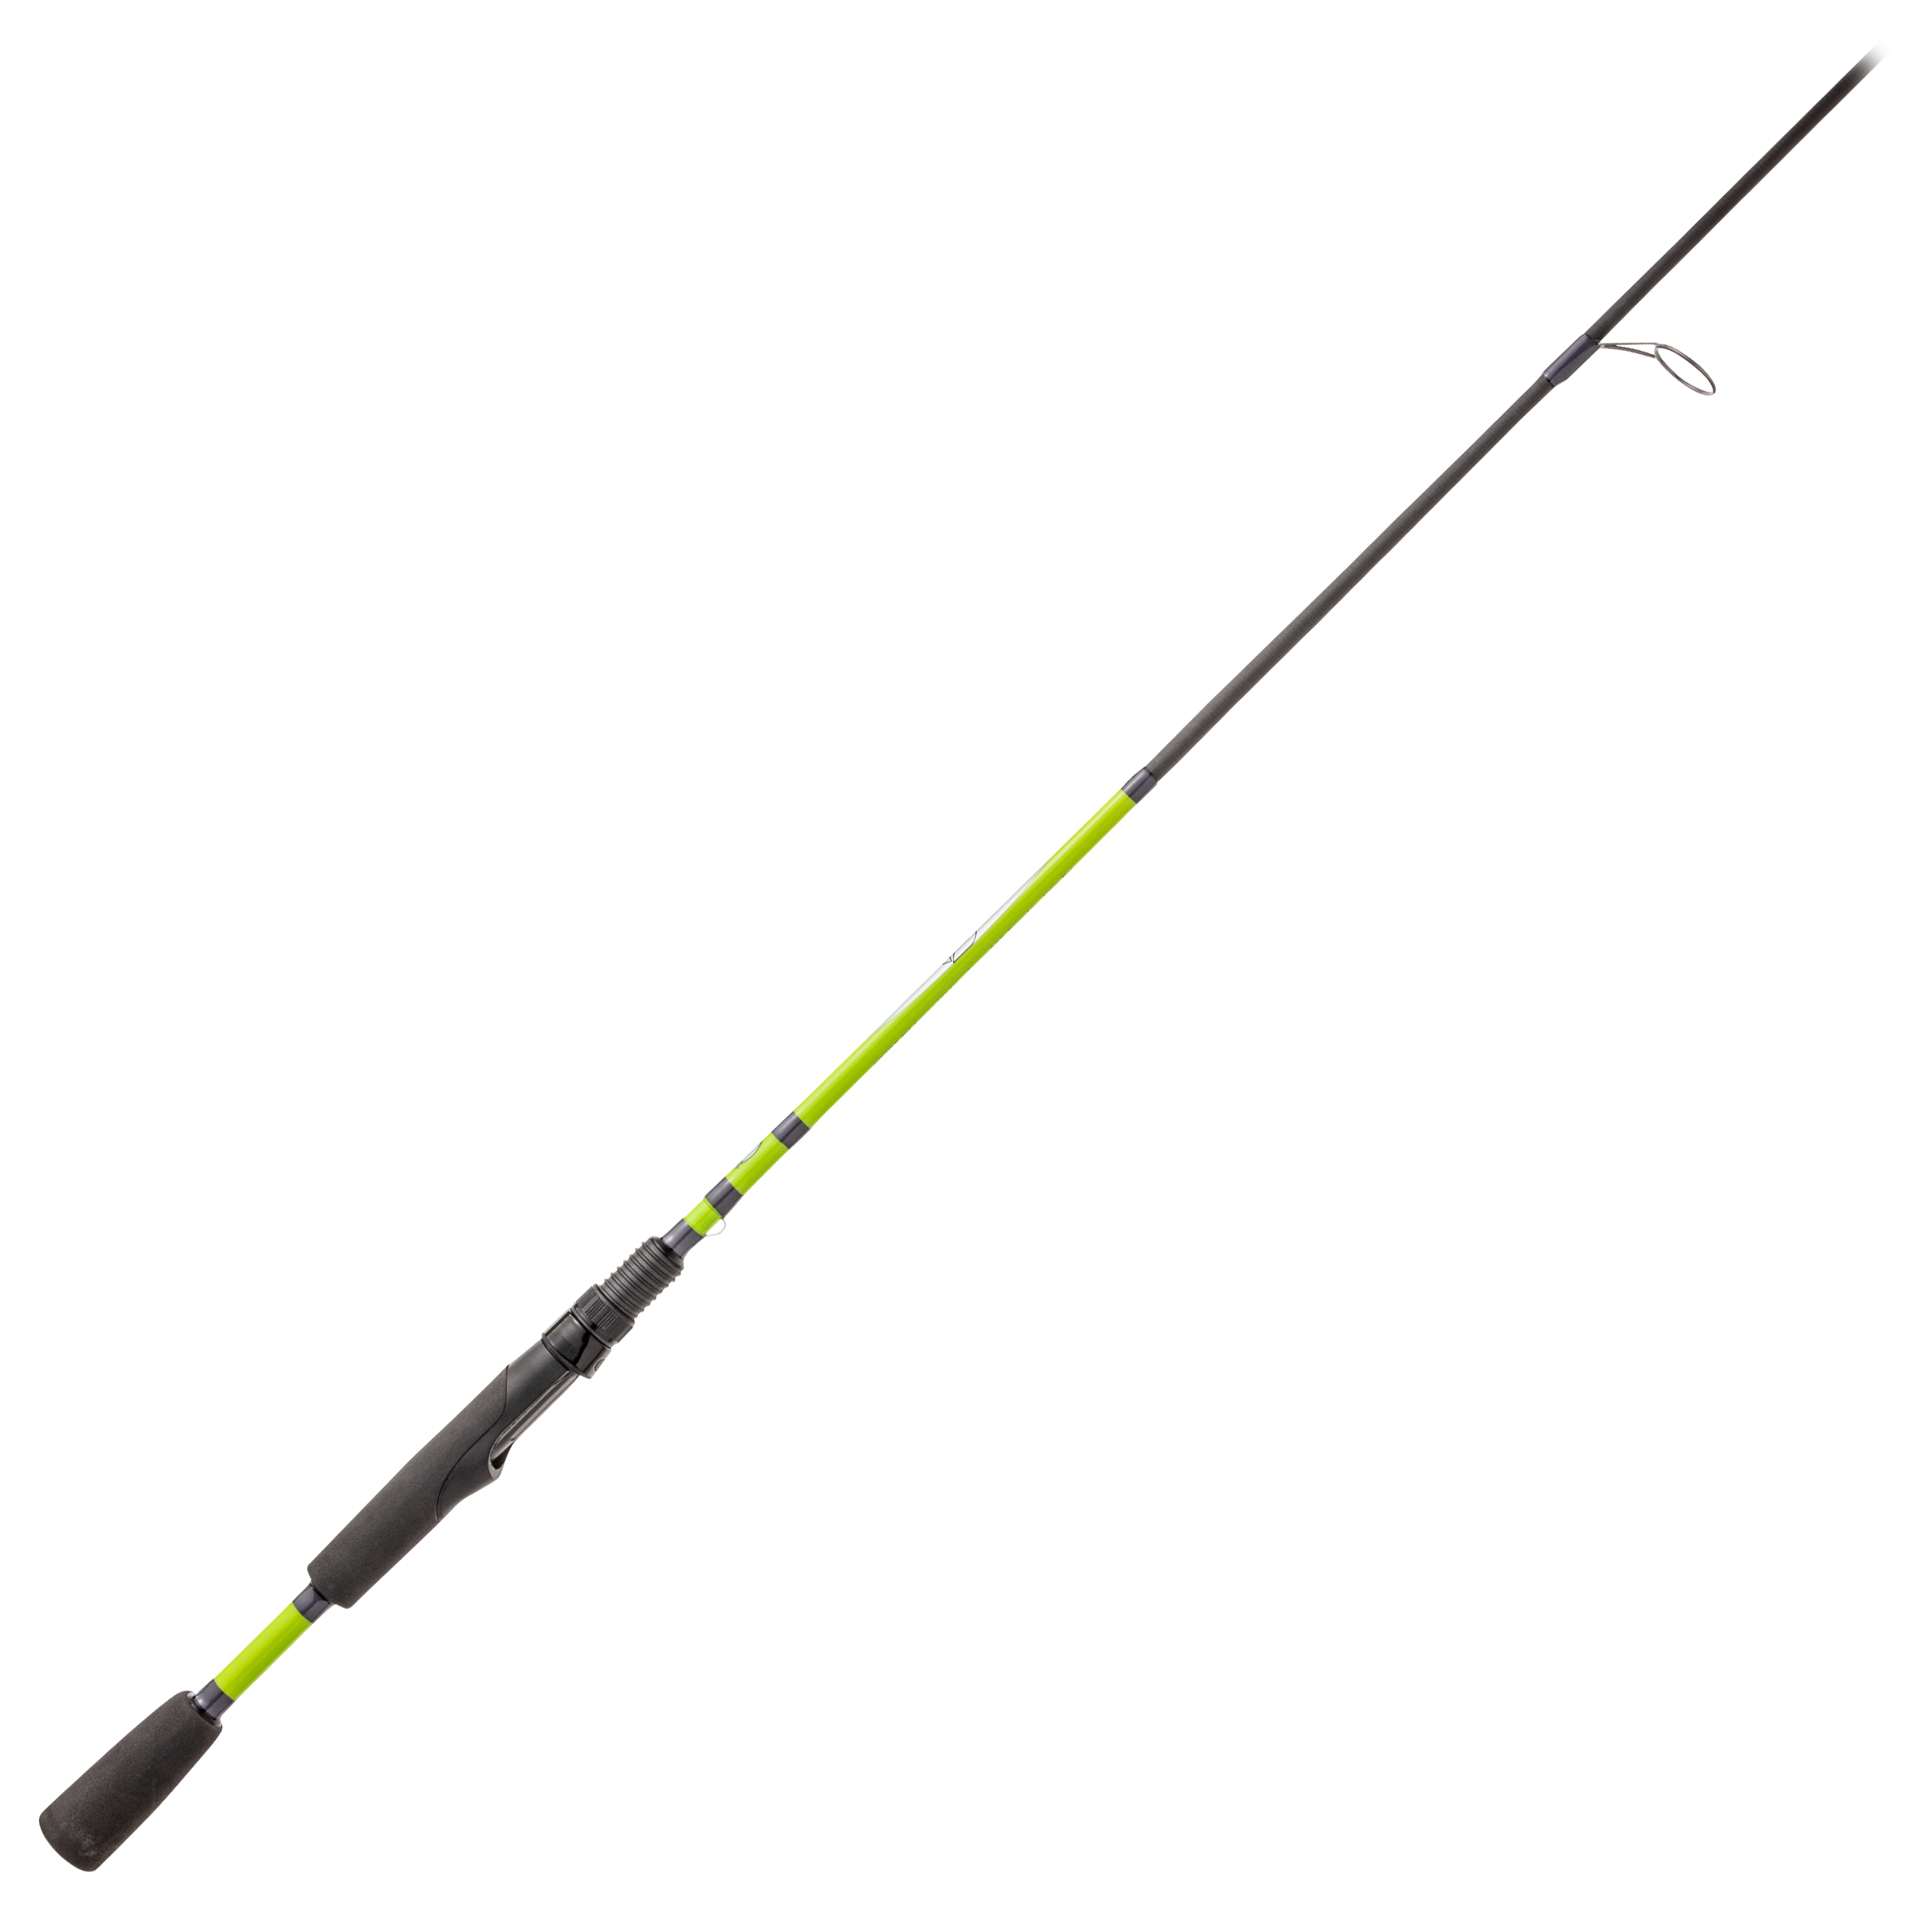 Bass Pro Shops Tourney Special Spinning Rod - 6' - Medium - B - 2 Pieces